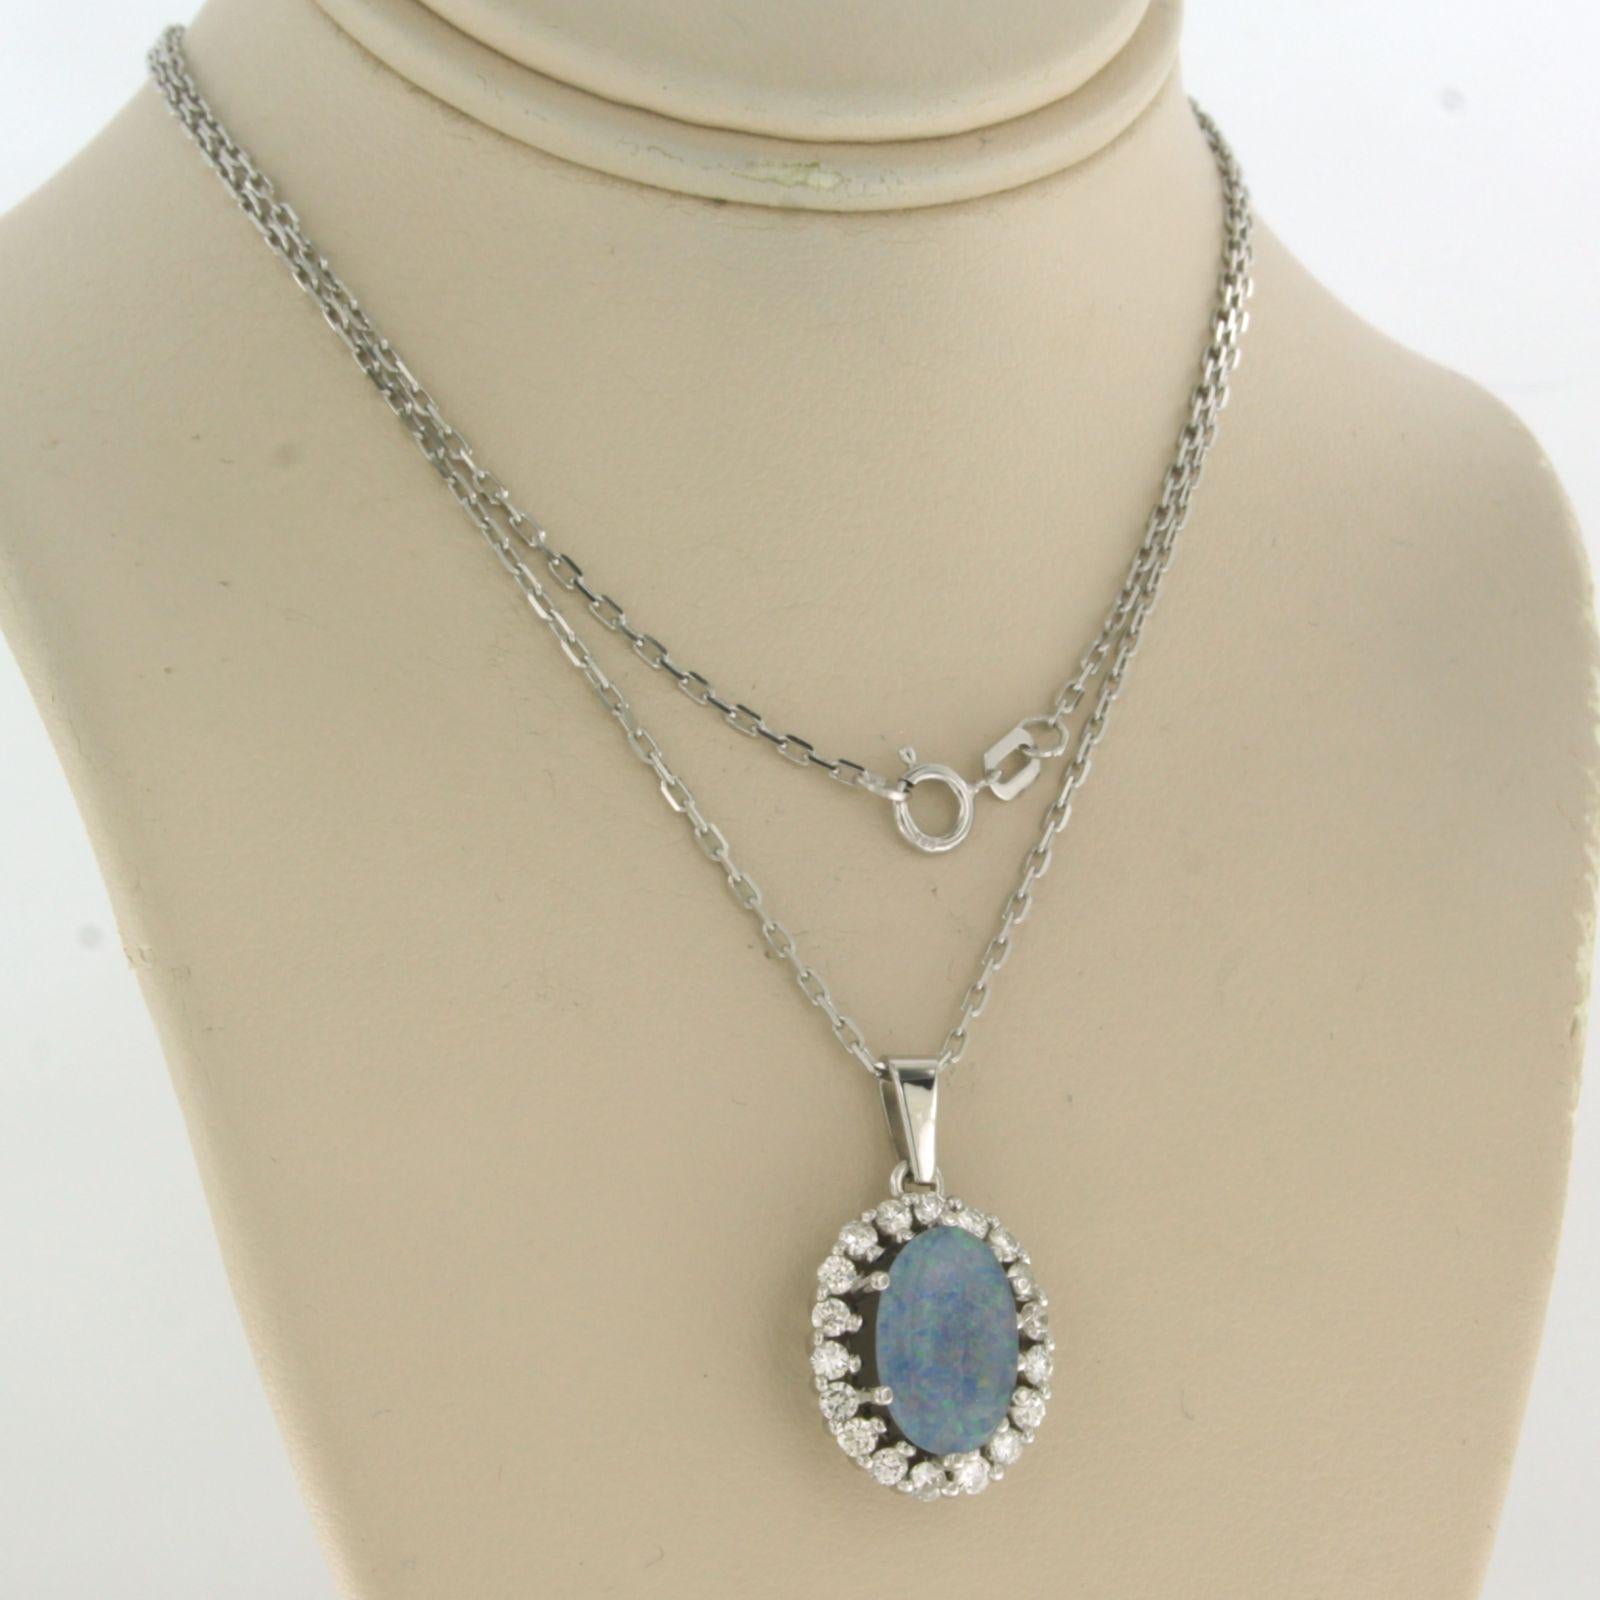 14 kt white gold necklace with an cluster pendant set with centre stone opal and brilliant cut diamonds around 0.60 ct - F/G - VS/SI - 42 cm long

detailed description

the length of the necklace is 42 cm long by 1.0 mm wide

size of the pendant is